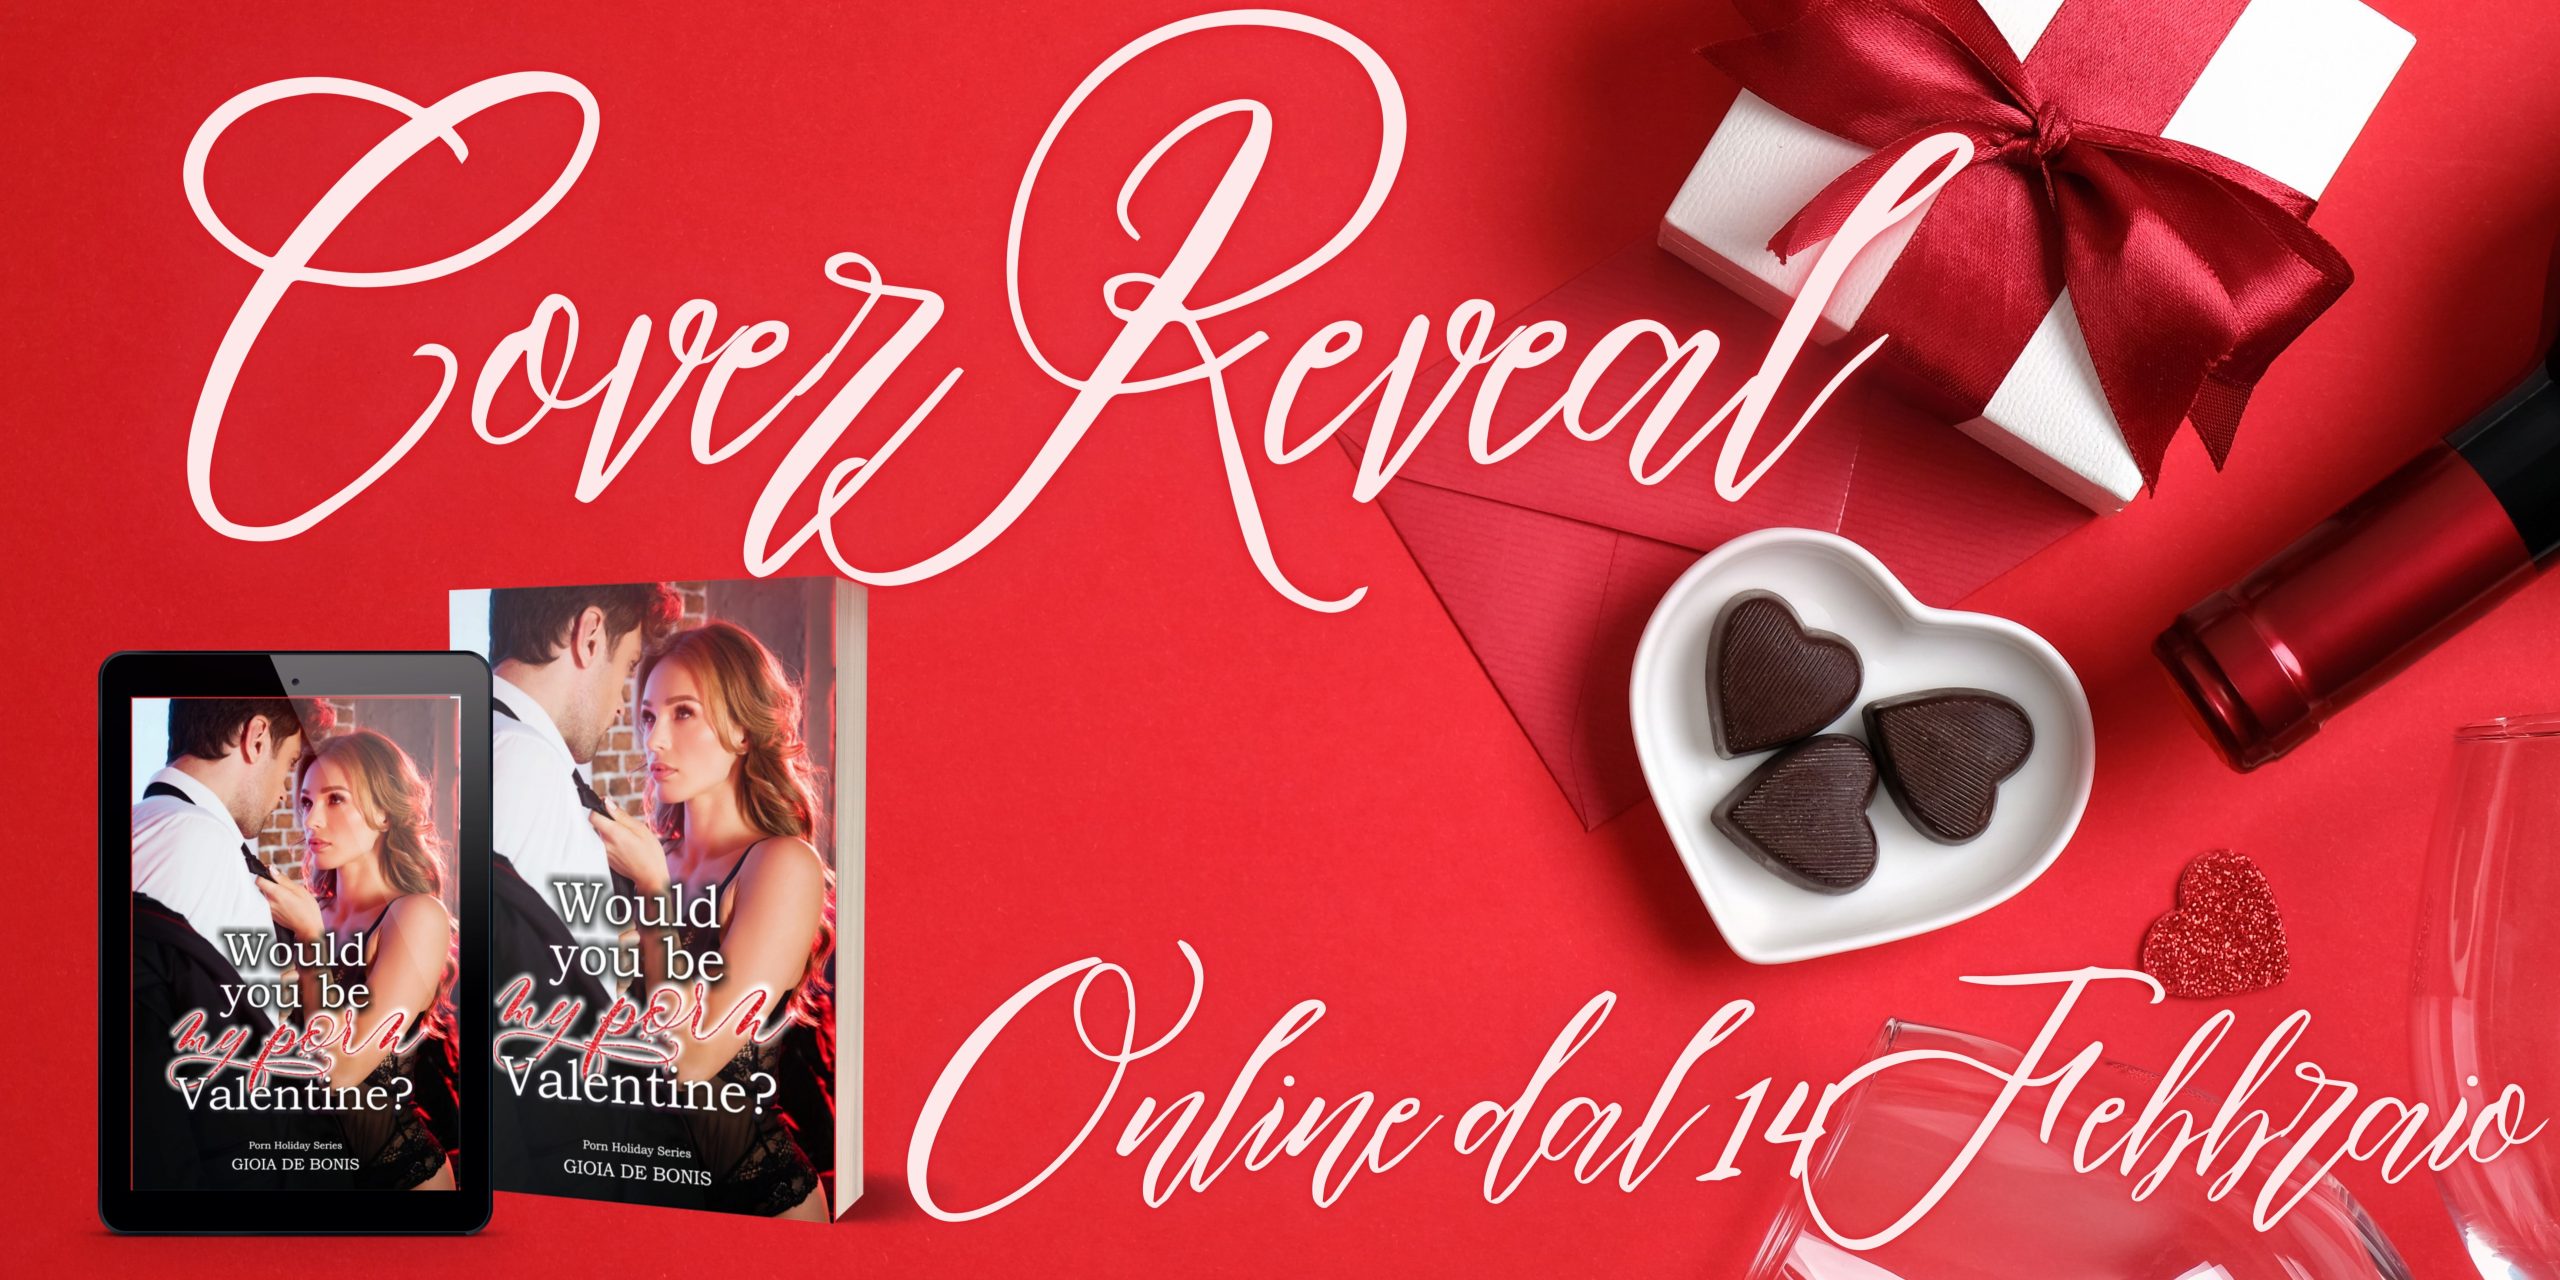 Cover reveal “WOULD YOU BE MY PORN VALENTINE” di Gioia De Bonis